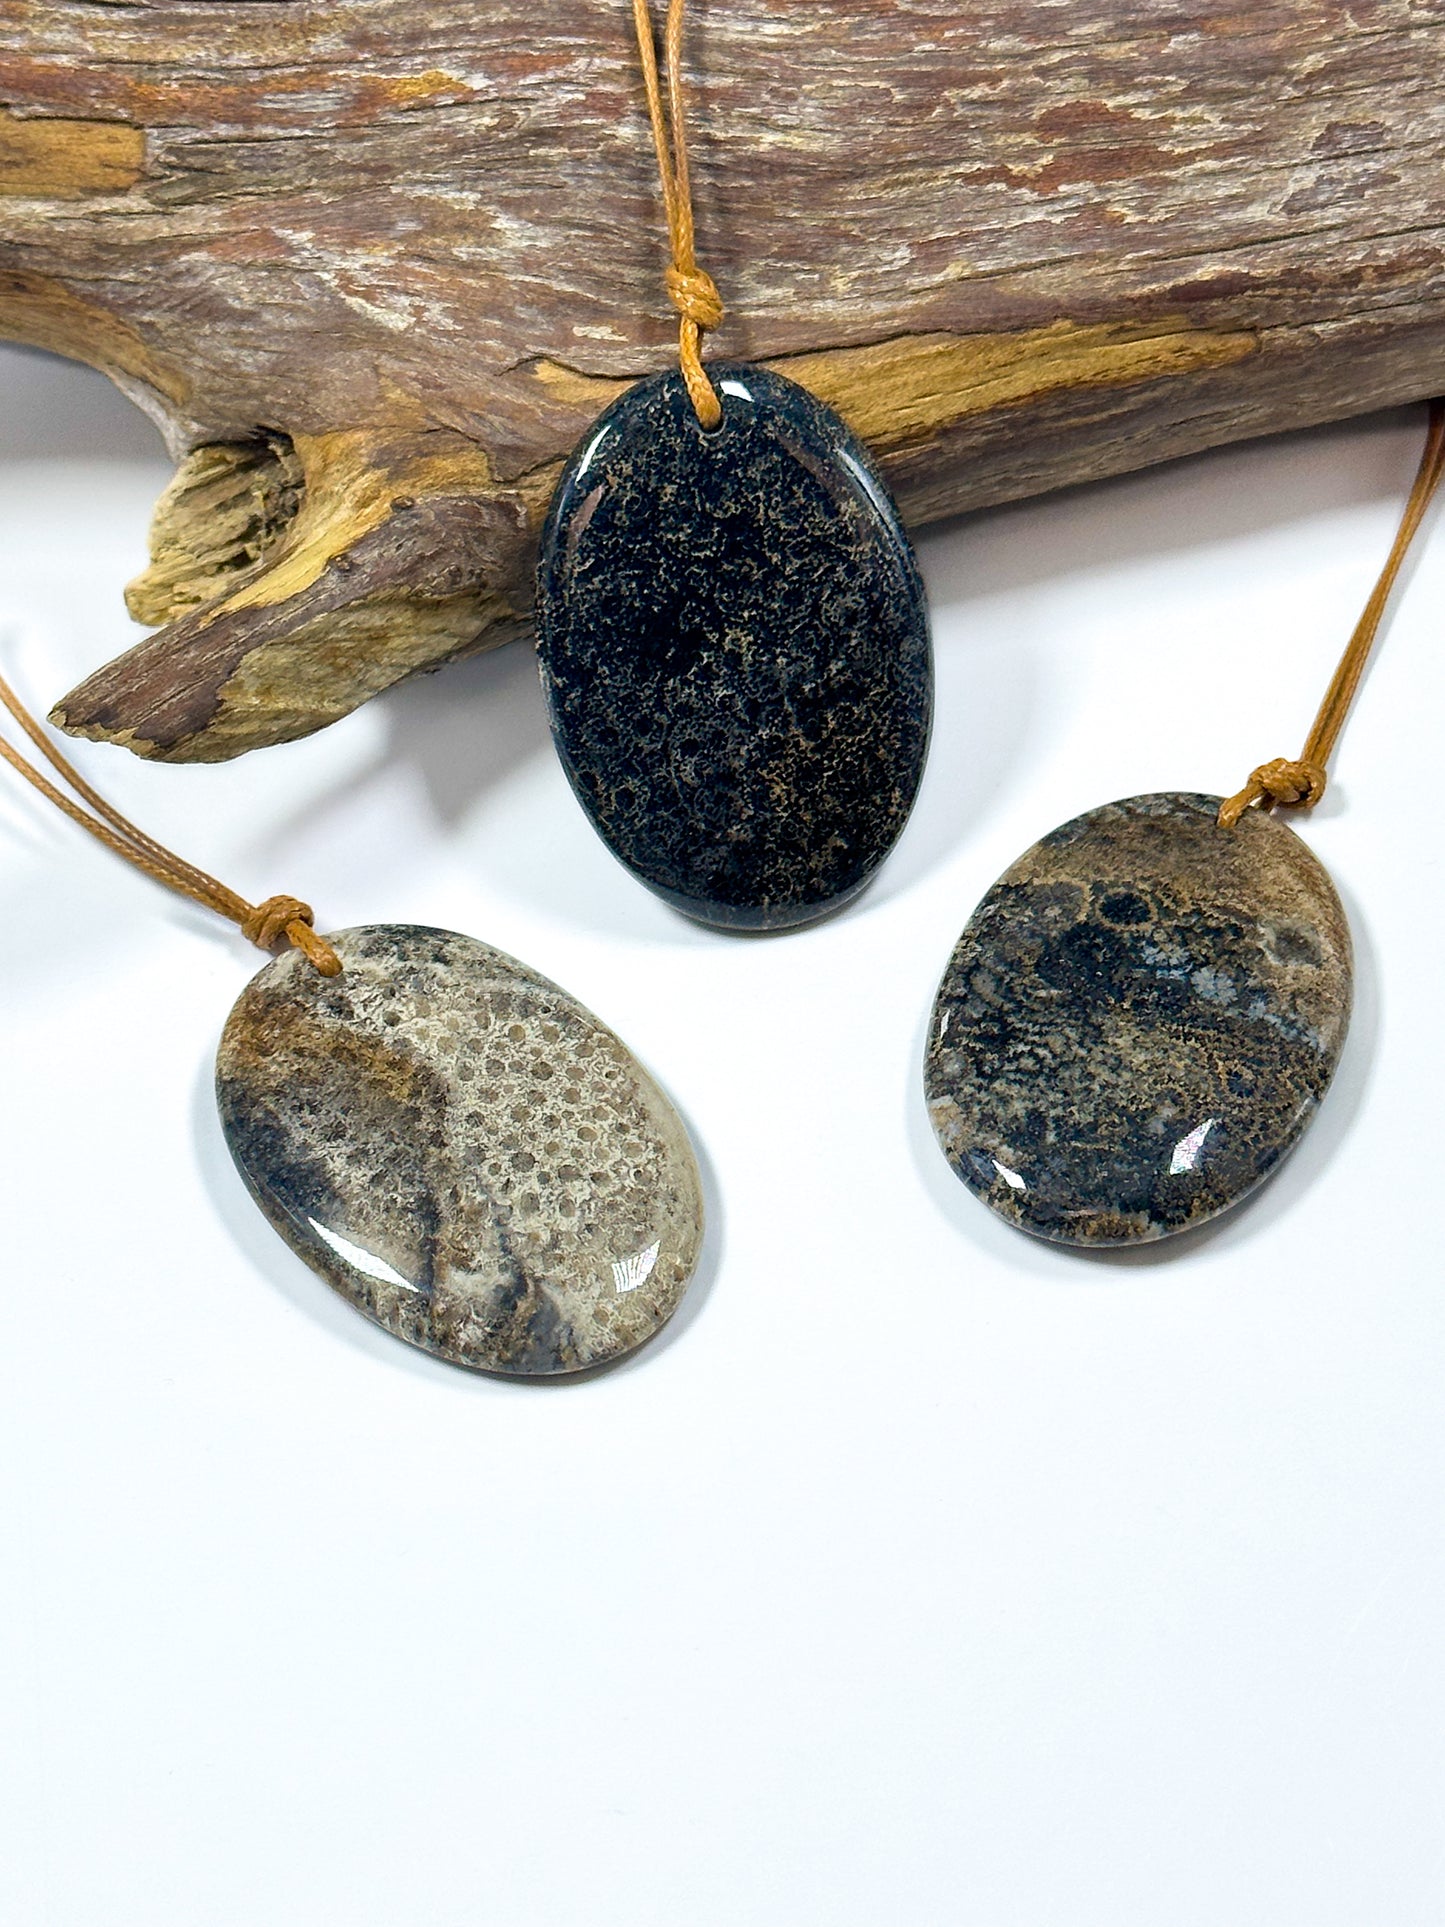 NATURAL Black Fossil Coral Gemstone Pendant 50x35mm Oval Shape Pendant, Beautiful Black Gray Beige Color Fossil Coral Loose Pendant